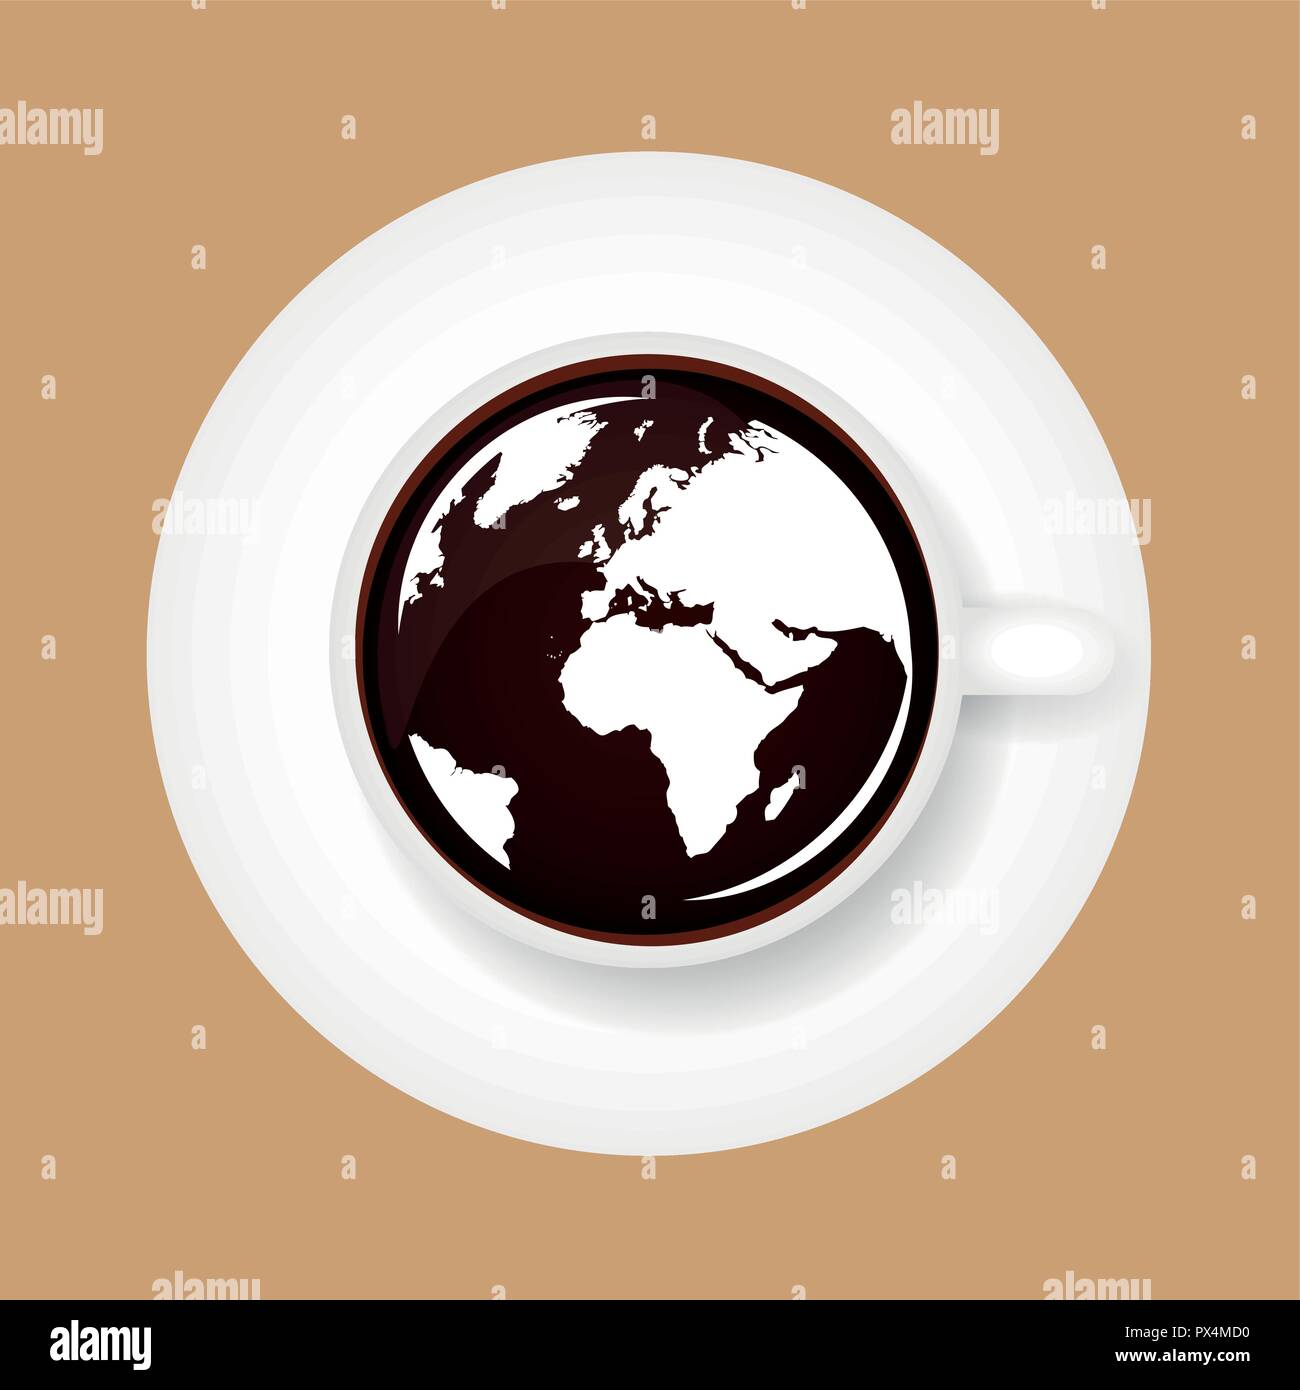 world map in coffee cup vector illustration EPS10 Stock Vector